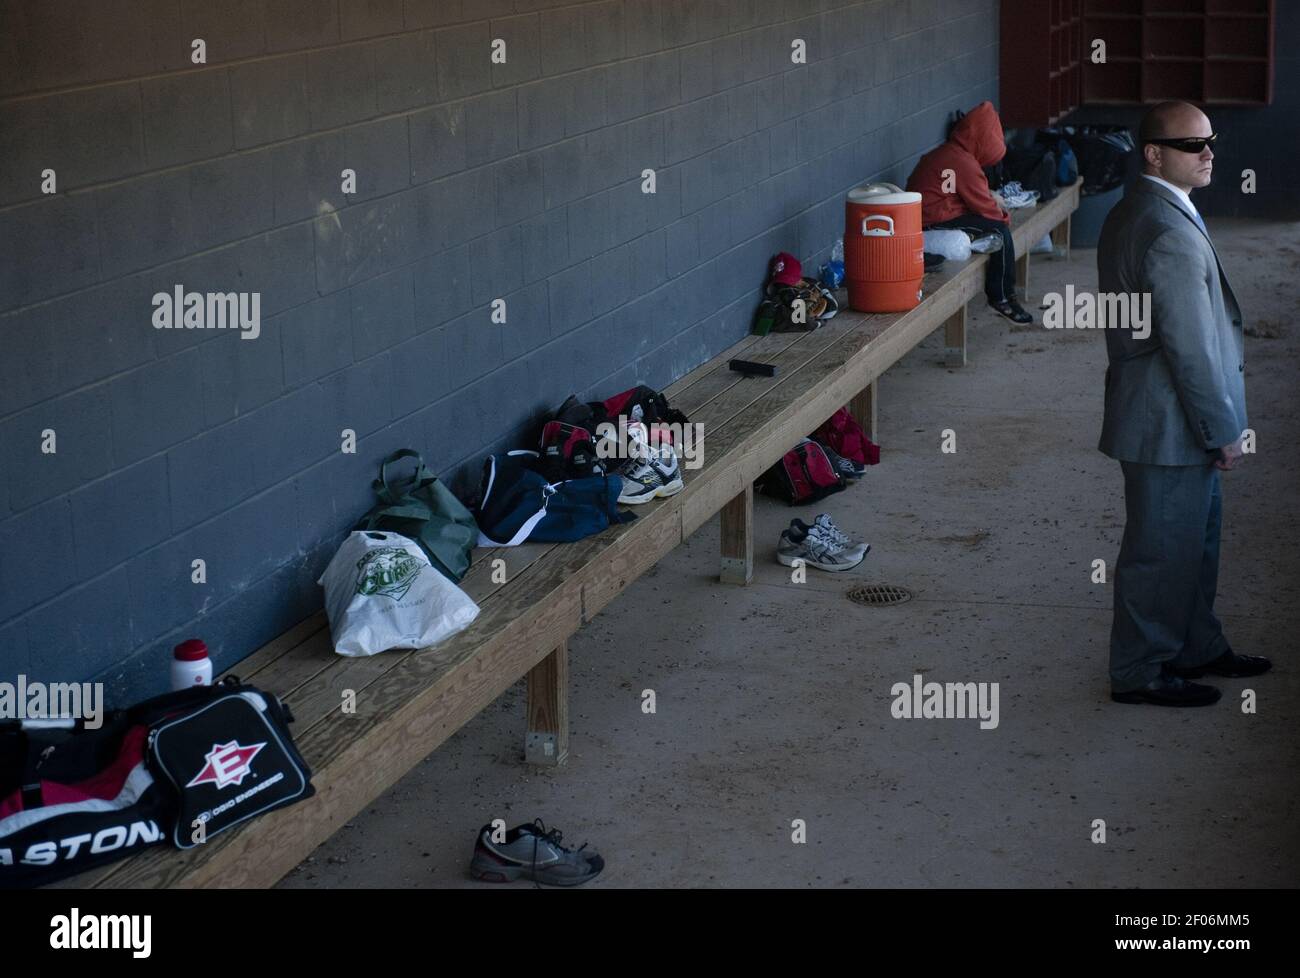 UNITED STATES Ð JUNE 14: File photo of a U.S. Capitol Police officer keeping an eye on the Republicans' baseball practice from the dugout at Four Mile Run Park in Alexandria, Va., on June 15, 2011. After the shooting at the GOP baseball practice on June 14, 2017, members of the GOP baseball team credited House Majority Whip Steve Scalise's U.S. Capitol Police security detail with preventing further injuries or deaths. (File Photo By Bill Clark/Roll Call) *** Please Use Credit from Credit Field *** Stock Photo